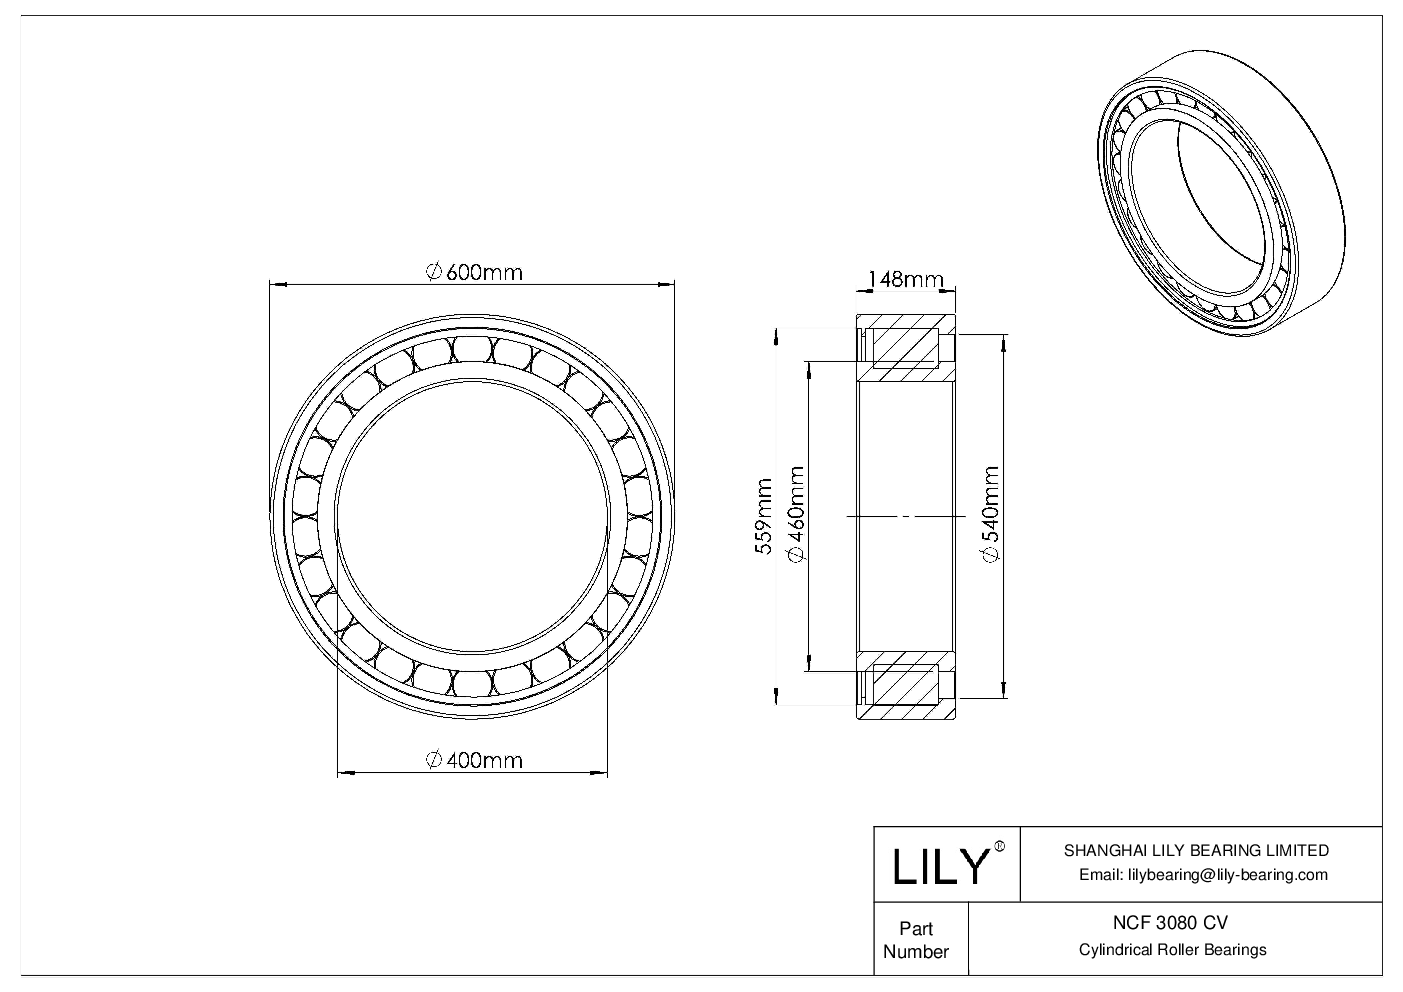 NCF 3080 CV Single Row Full Complement Cylindrical Roller Bearings cad drawing